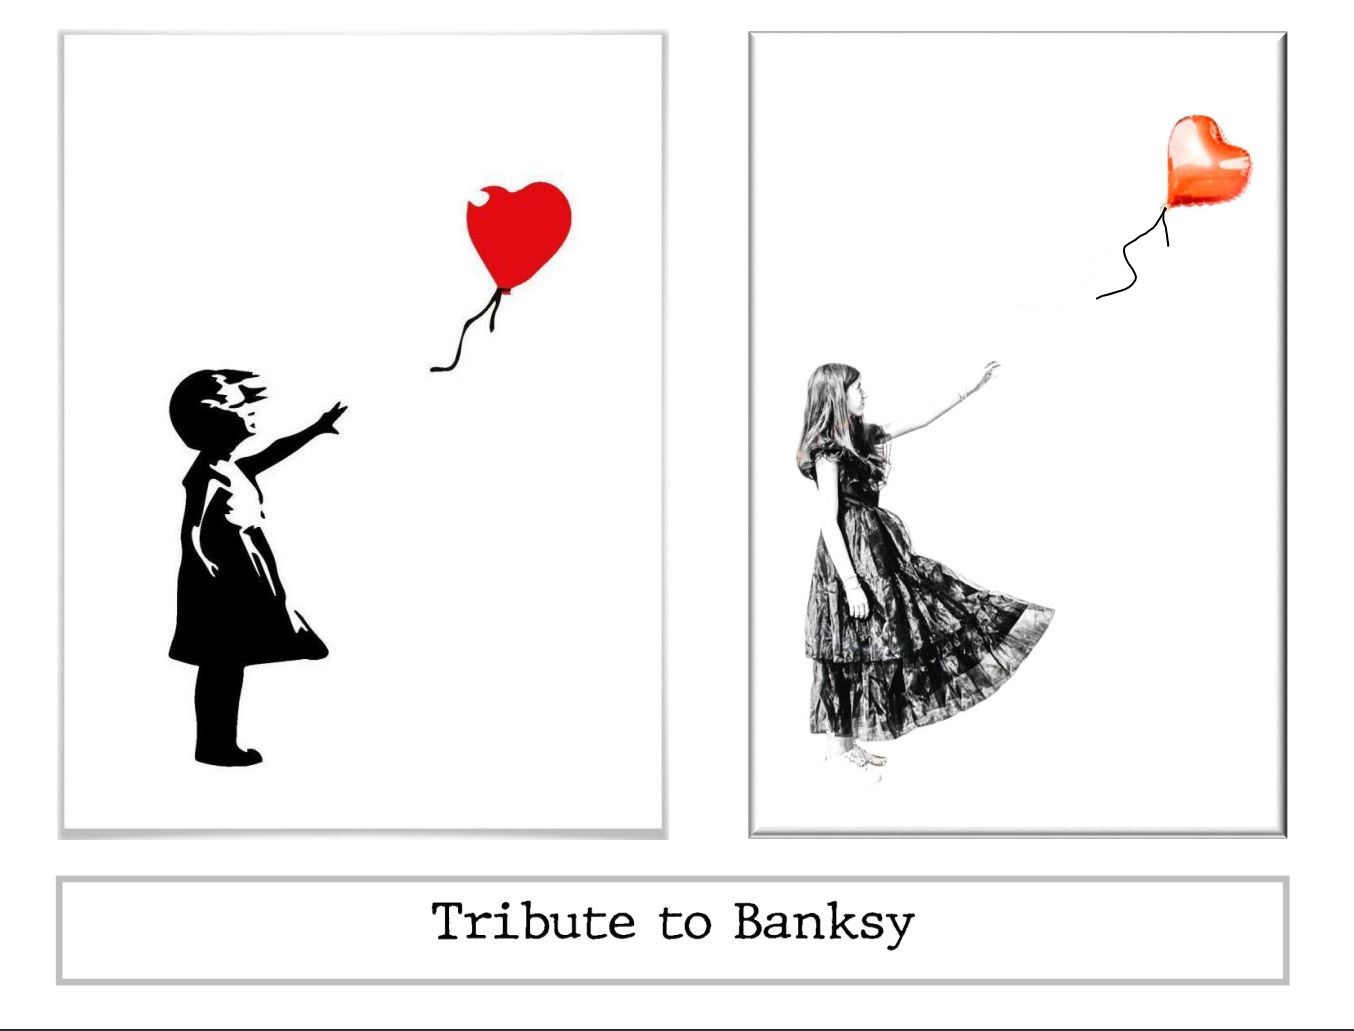 Tribute to Banksy